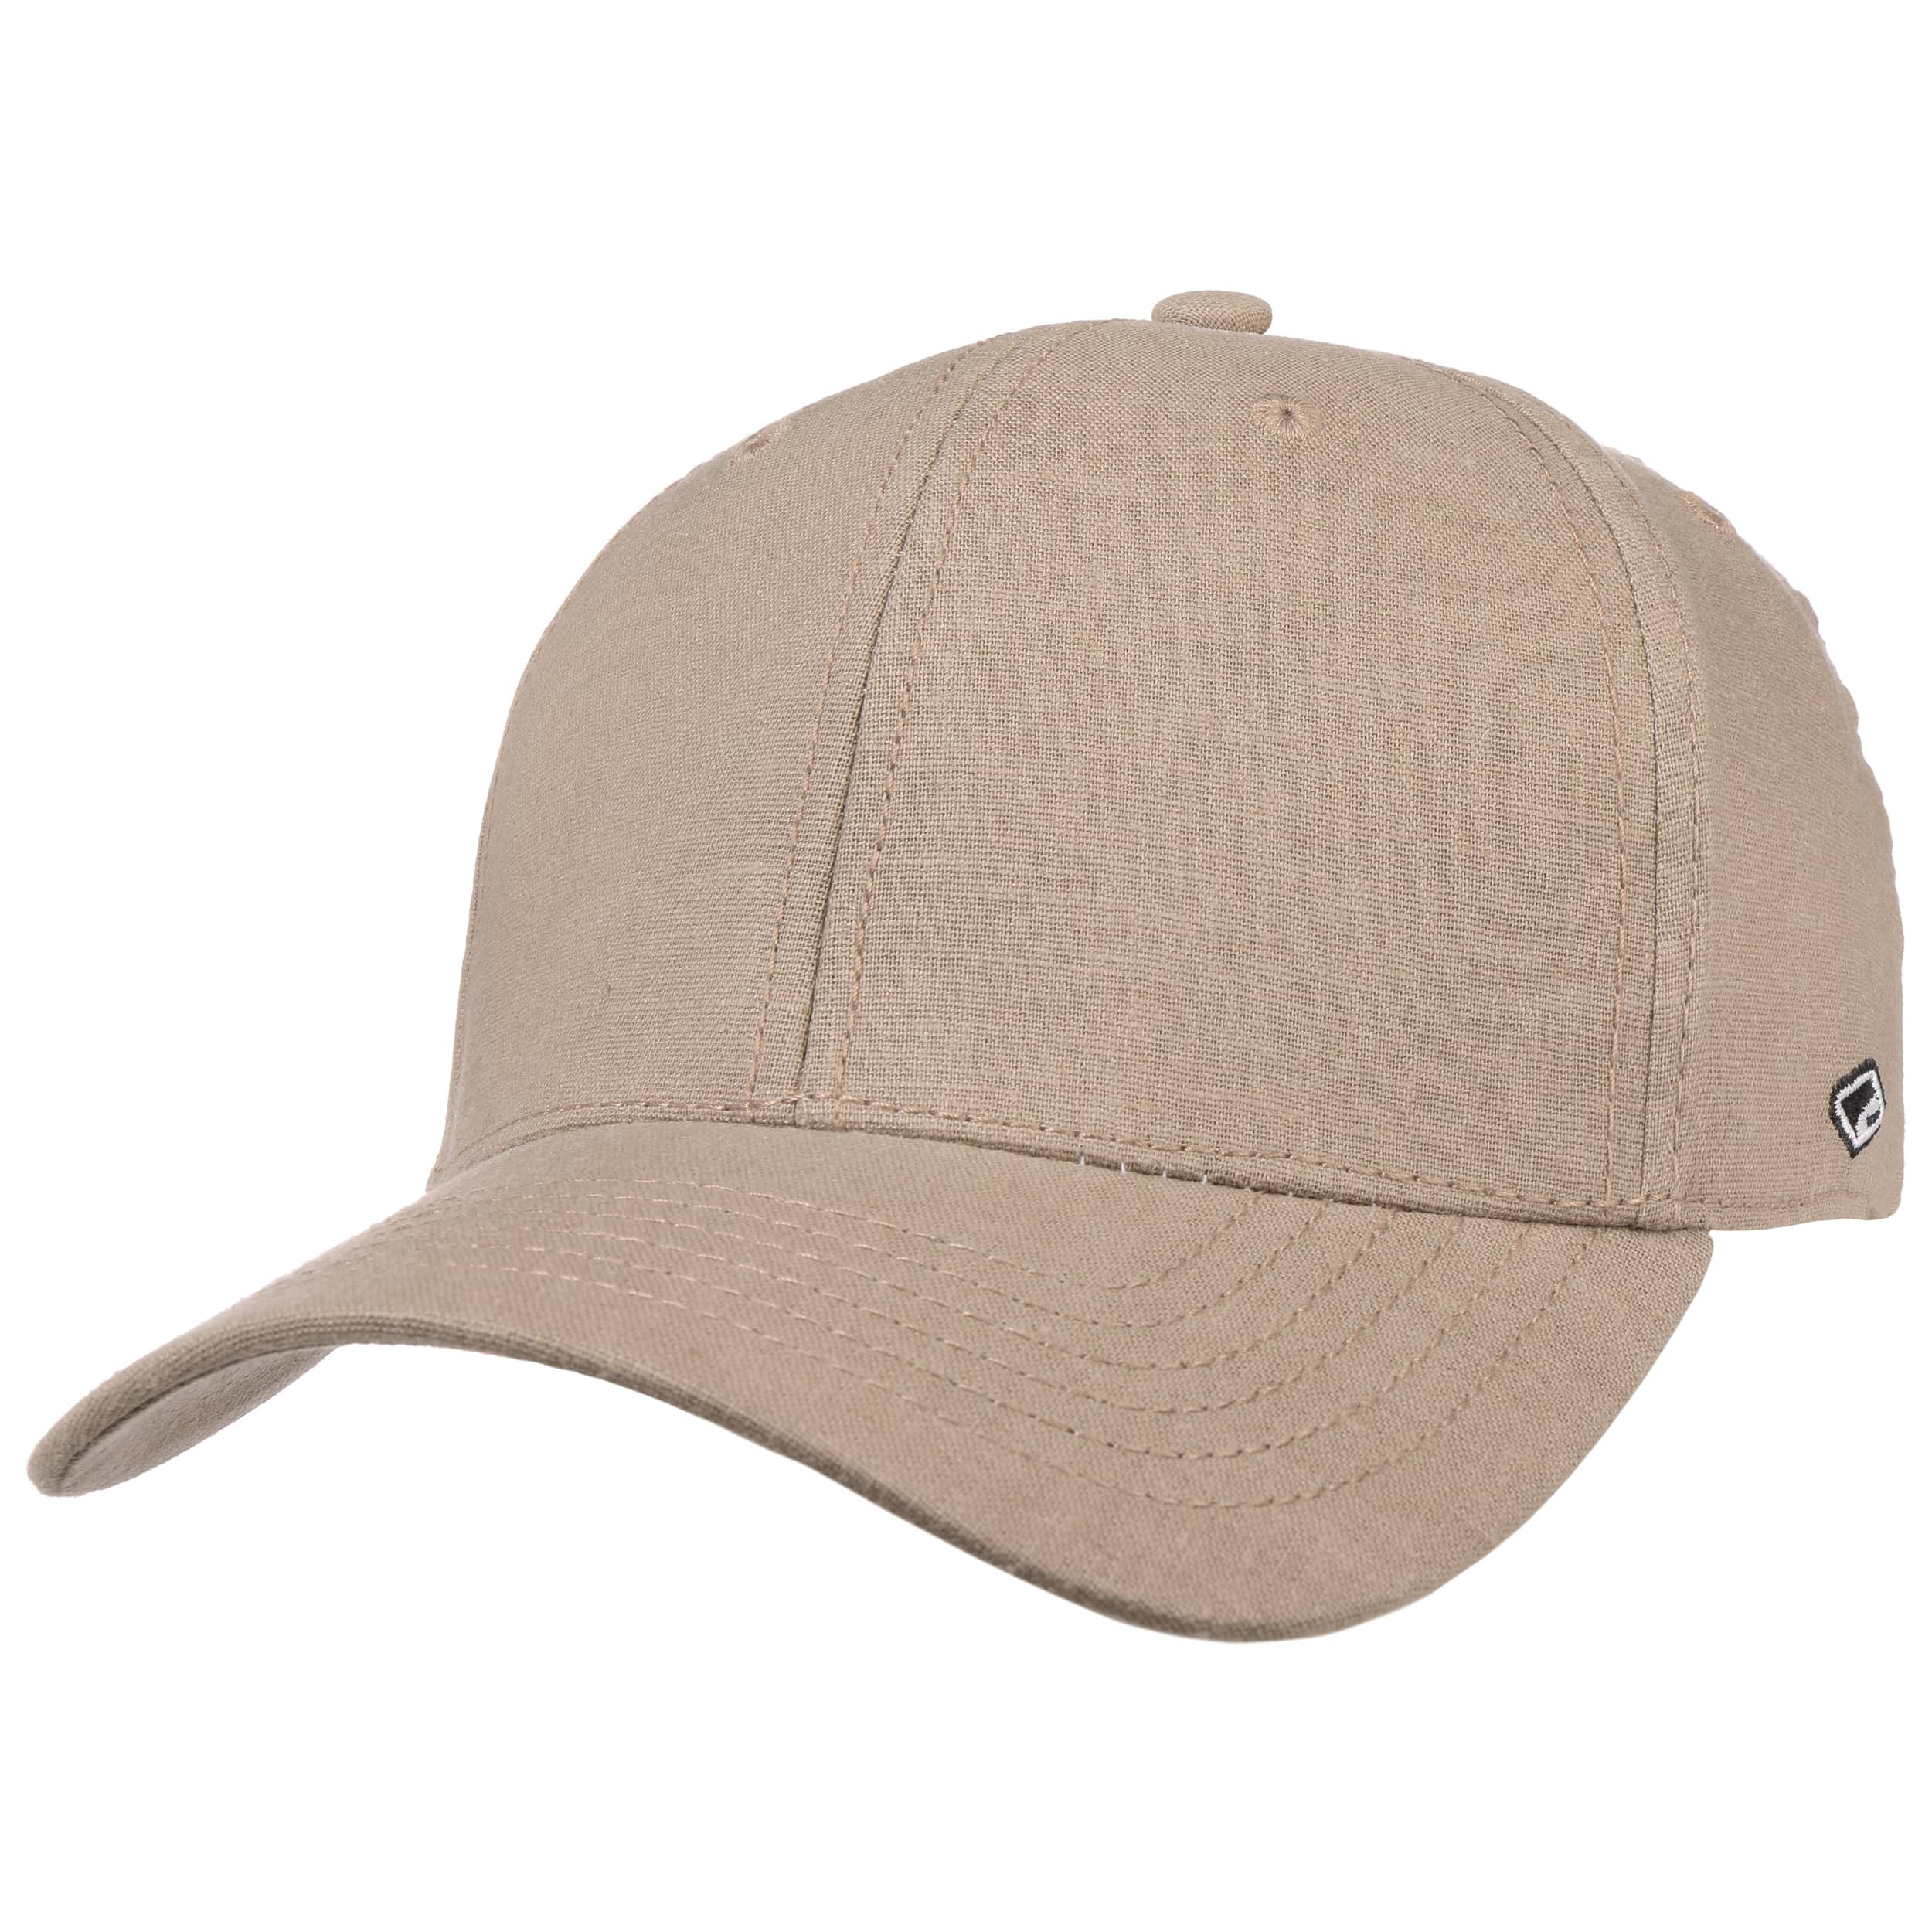 26,95 by Paolo Sao € Cap Linen - Chillouts